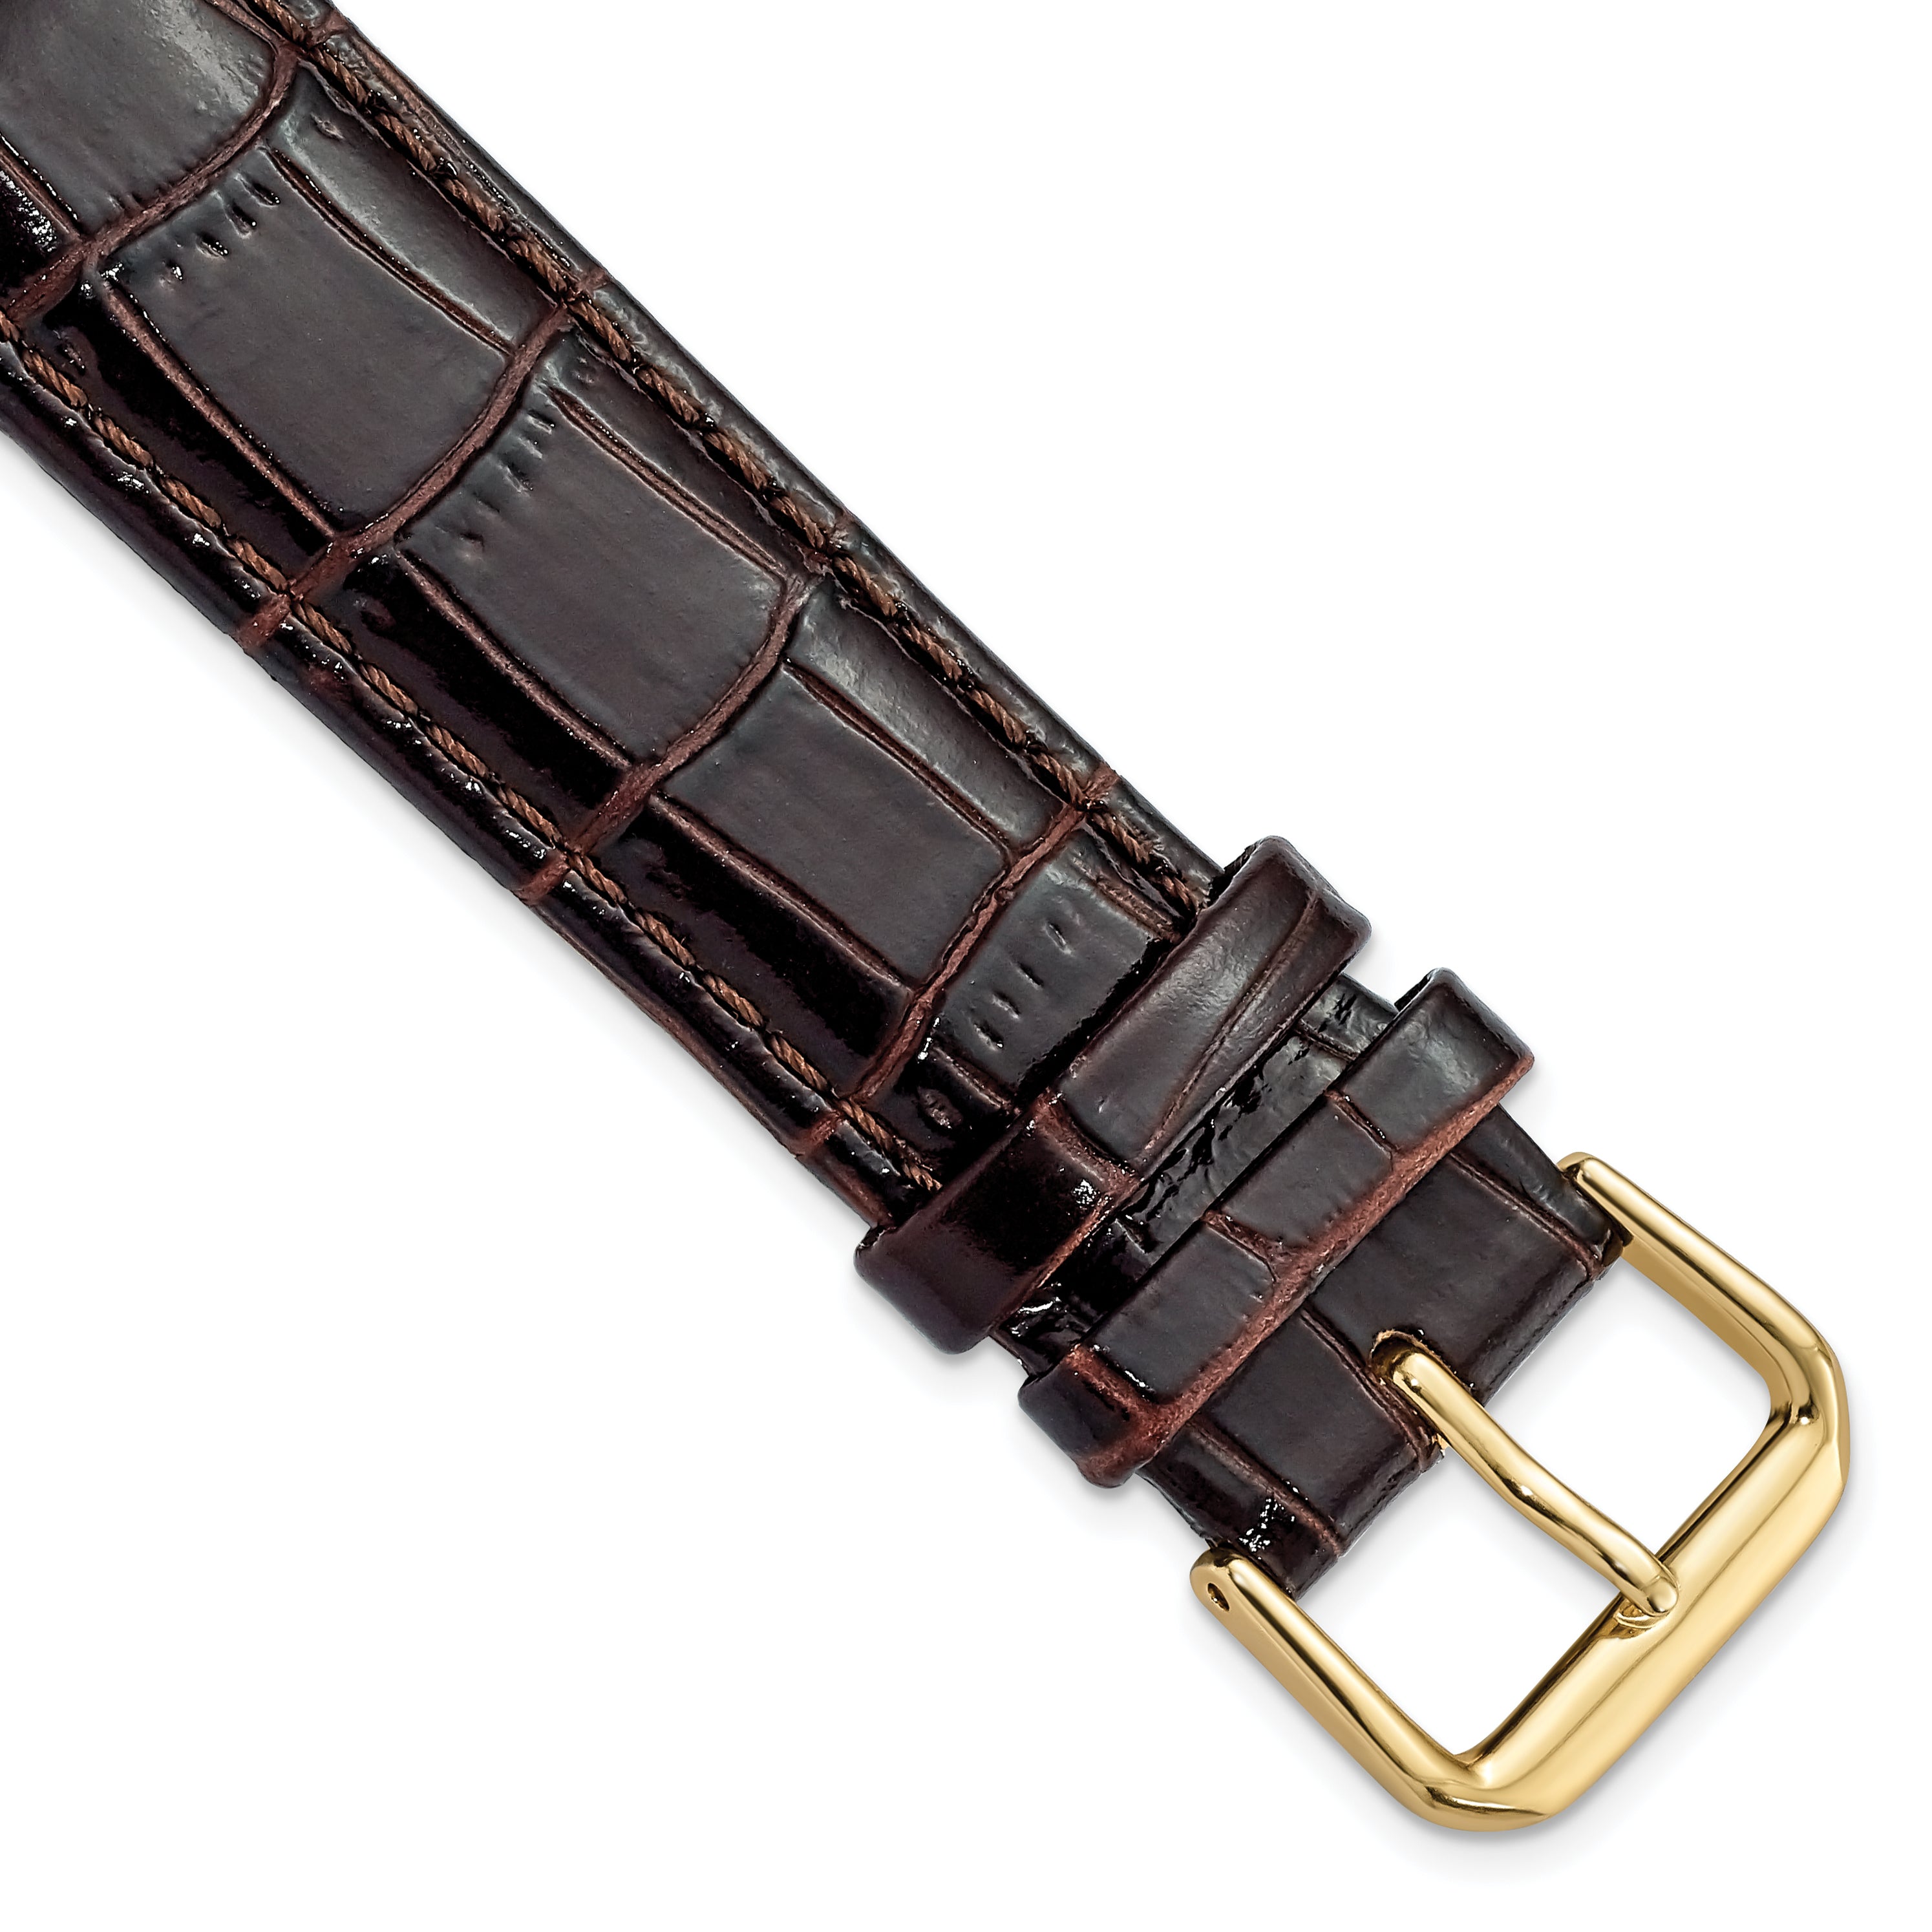 DeBeer 20mm Brown Crocodile Grain Leather with Dark Stitching and Gold-tone Buckle 7.5 inch Watch Band